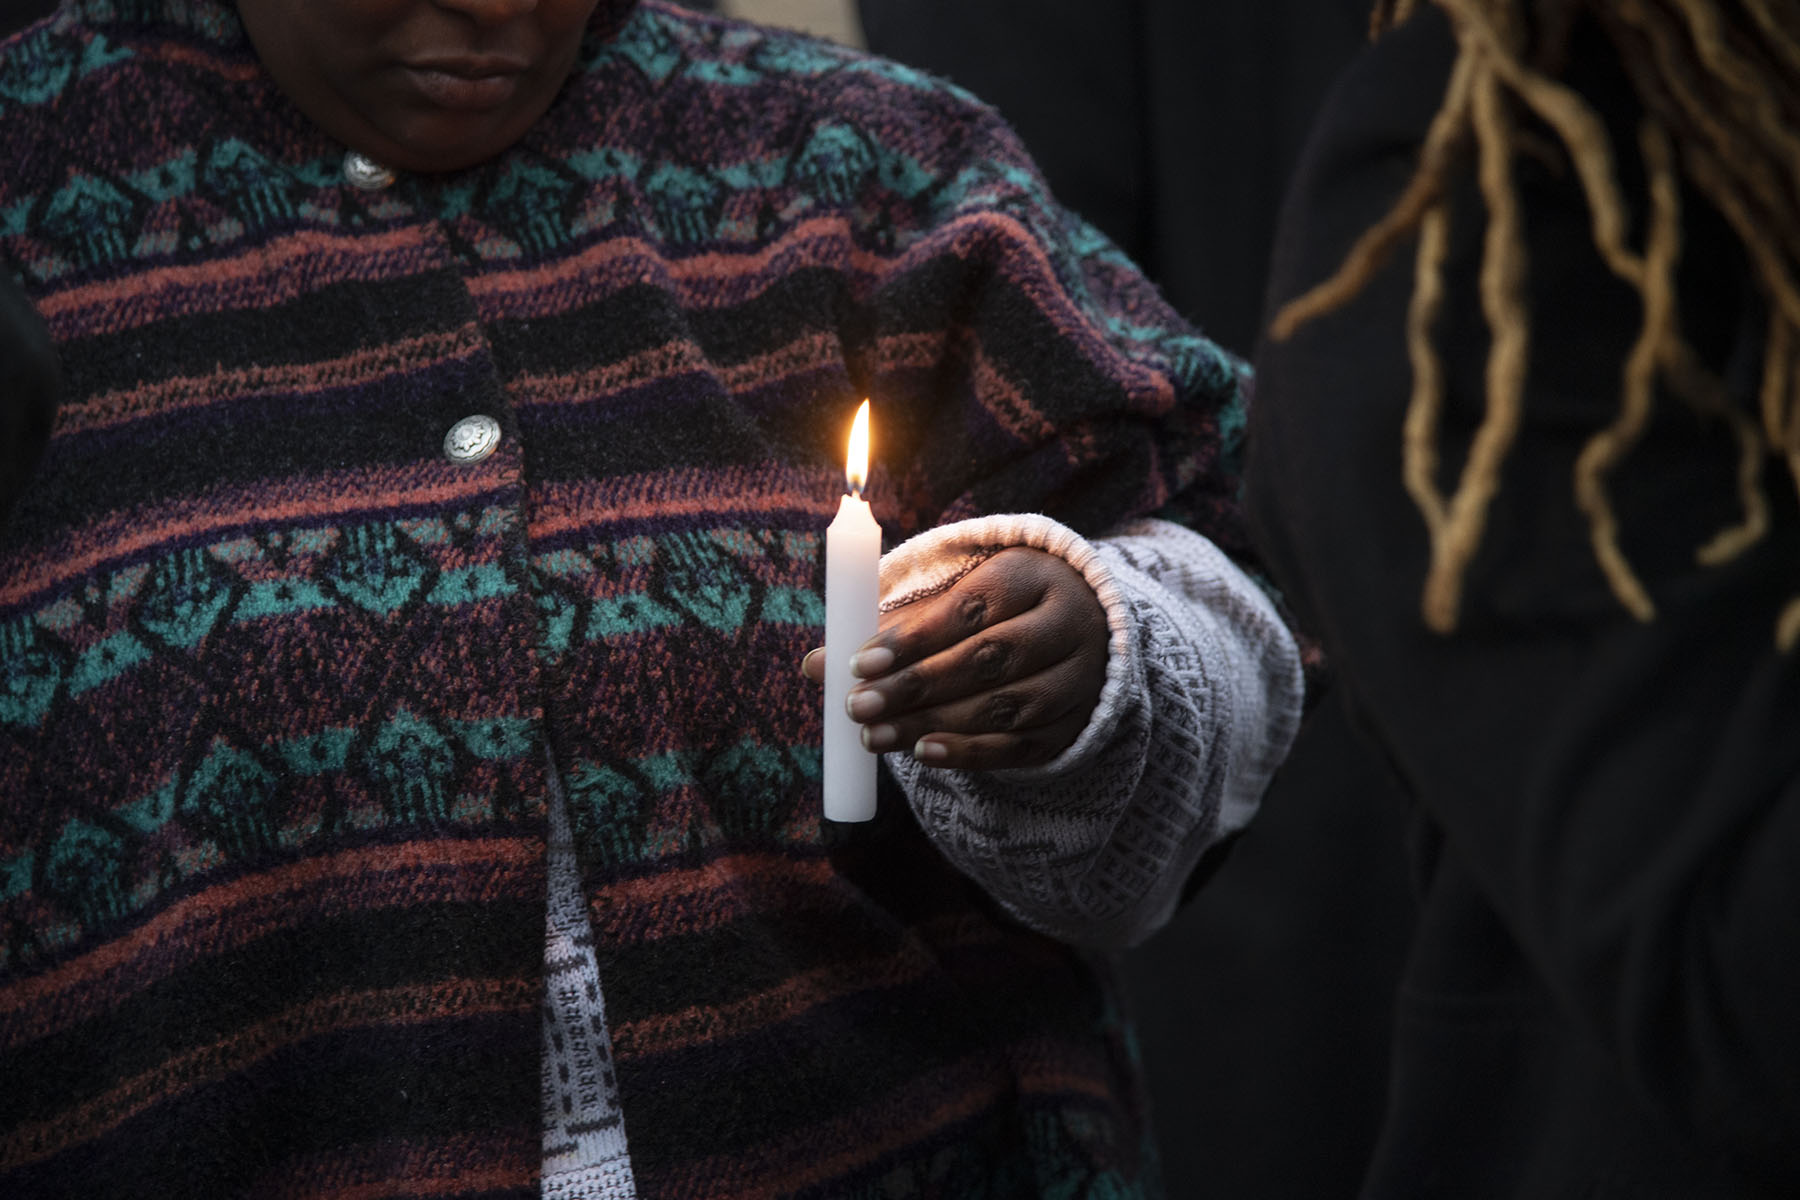 The transgender community gathers to mourn the death of Ashanti Carmon at a candelit vigil.